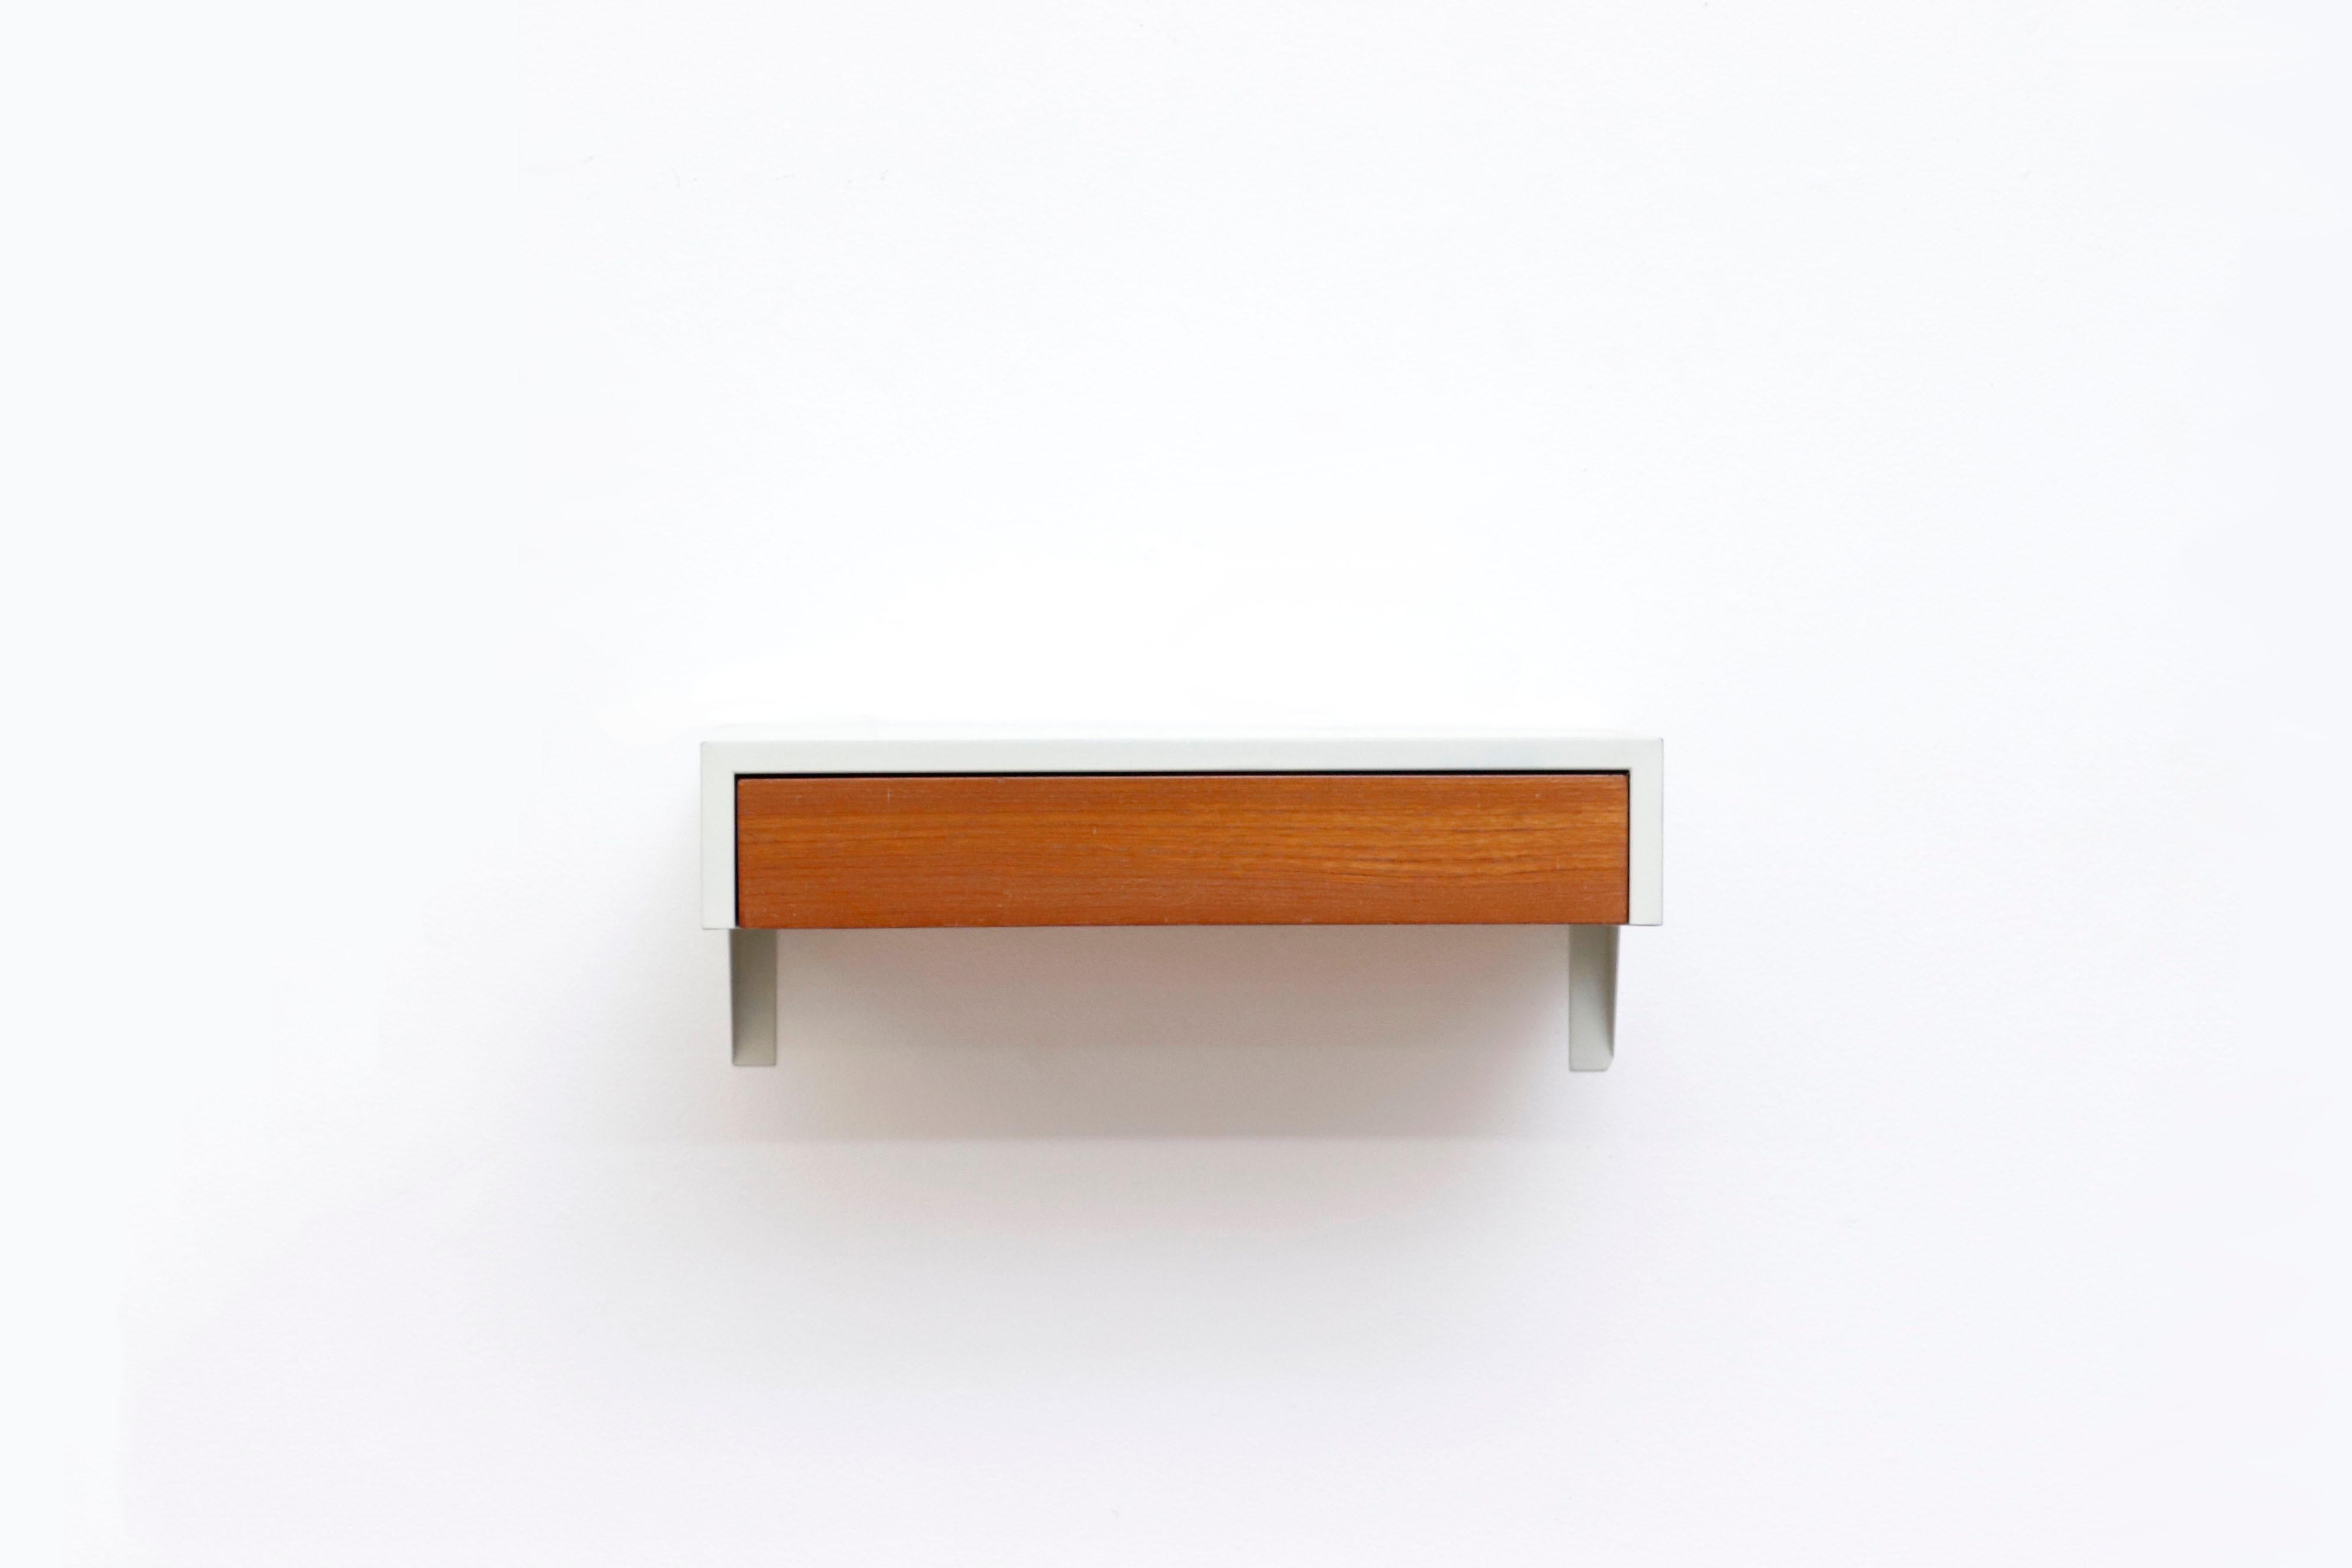 Rare Martin Visser wall shelf 'MODEL DD01' for 'T Spectrum, 1950s. Off white enameled metal frame with natural wood drawer. Sleek minimalist design and beautiful contrast of materials. Refinished.